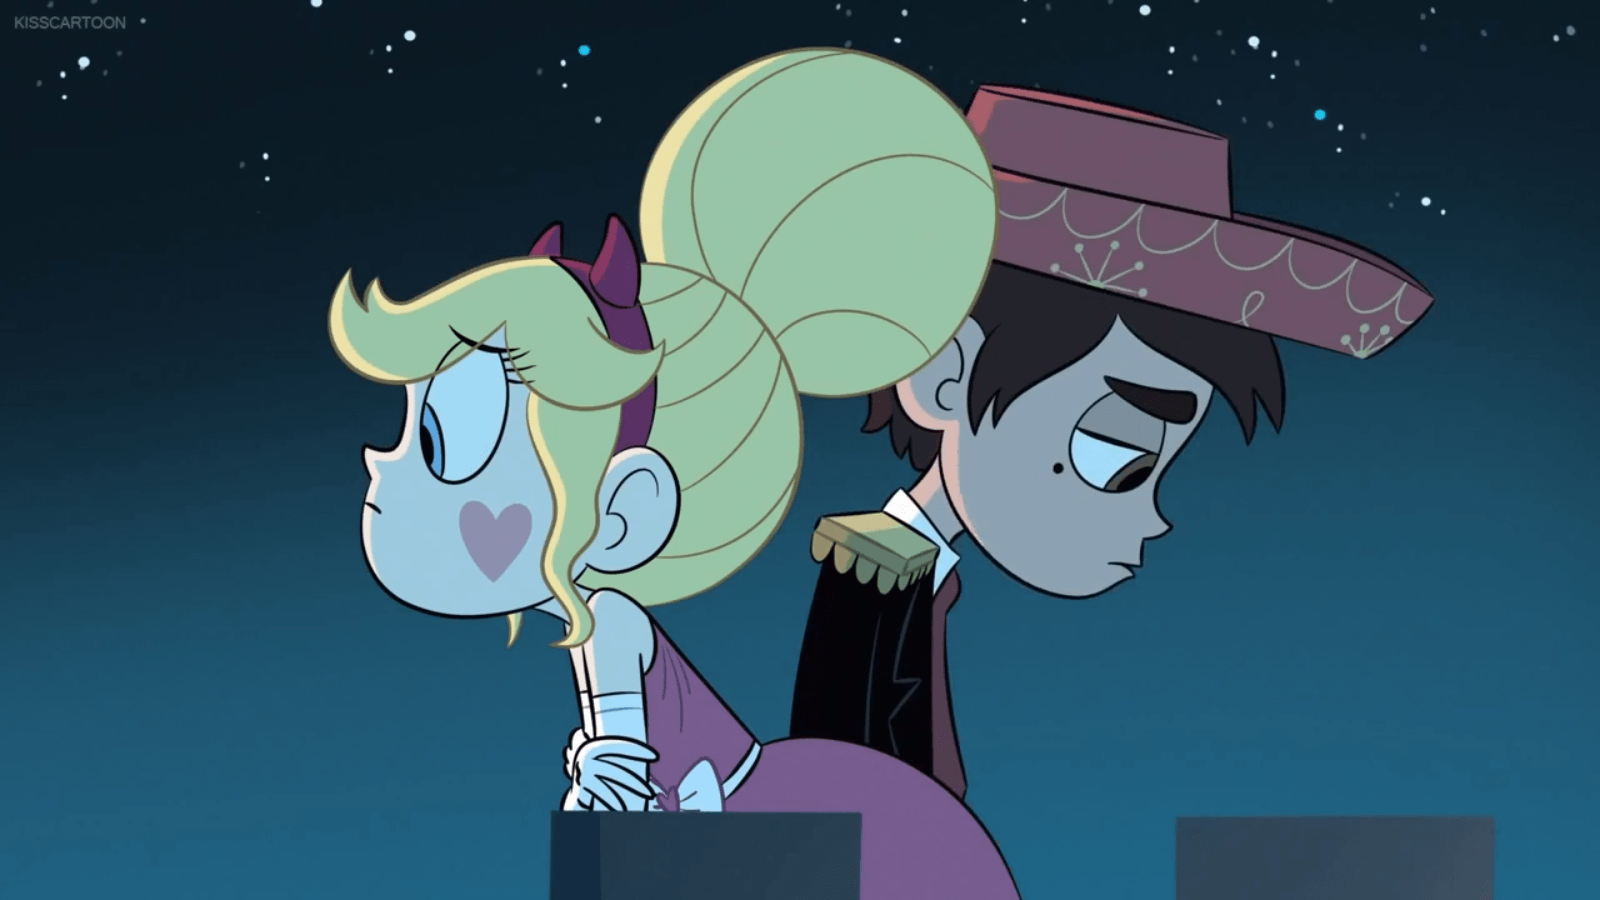 Star Butterfly And Marco Diaz In The Magical Dimension - Star Vs The Forces Of Evil Wallpapers